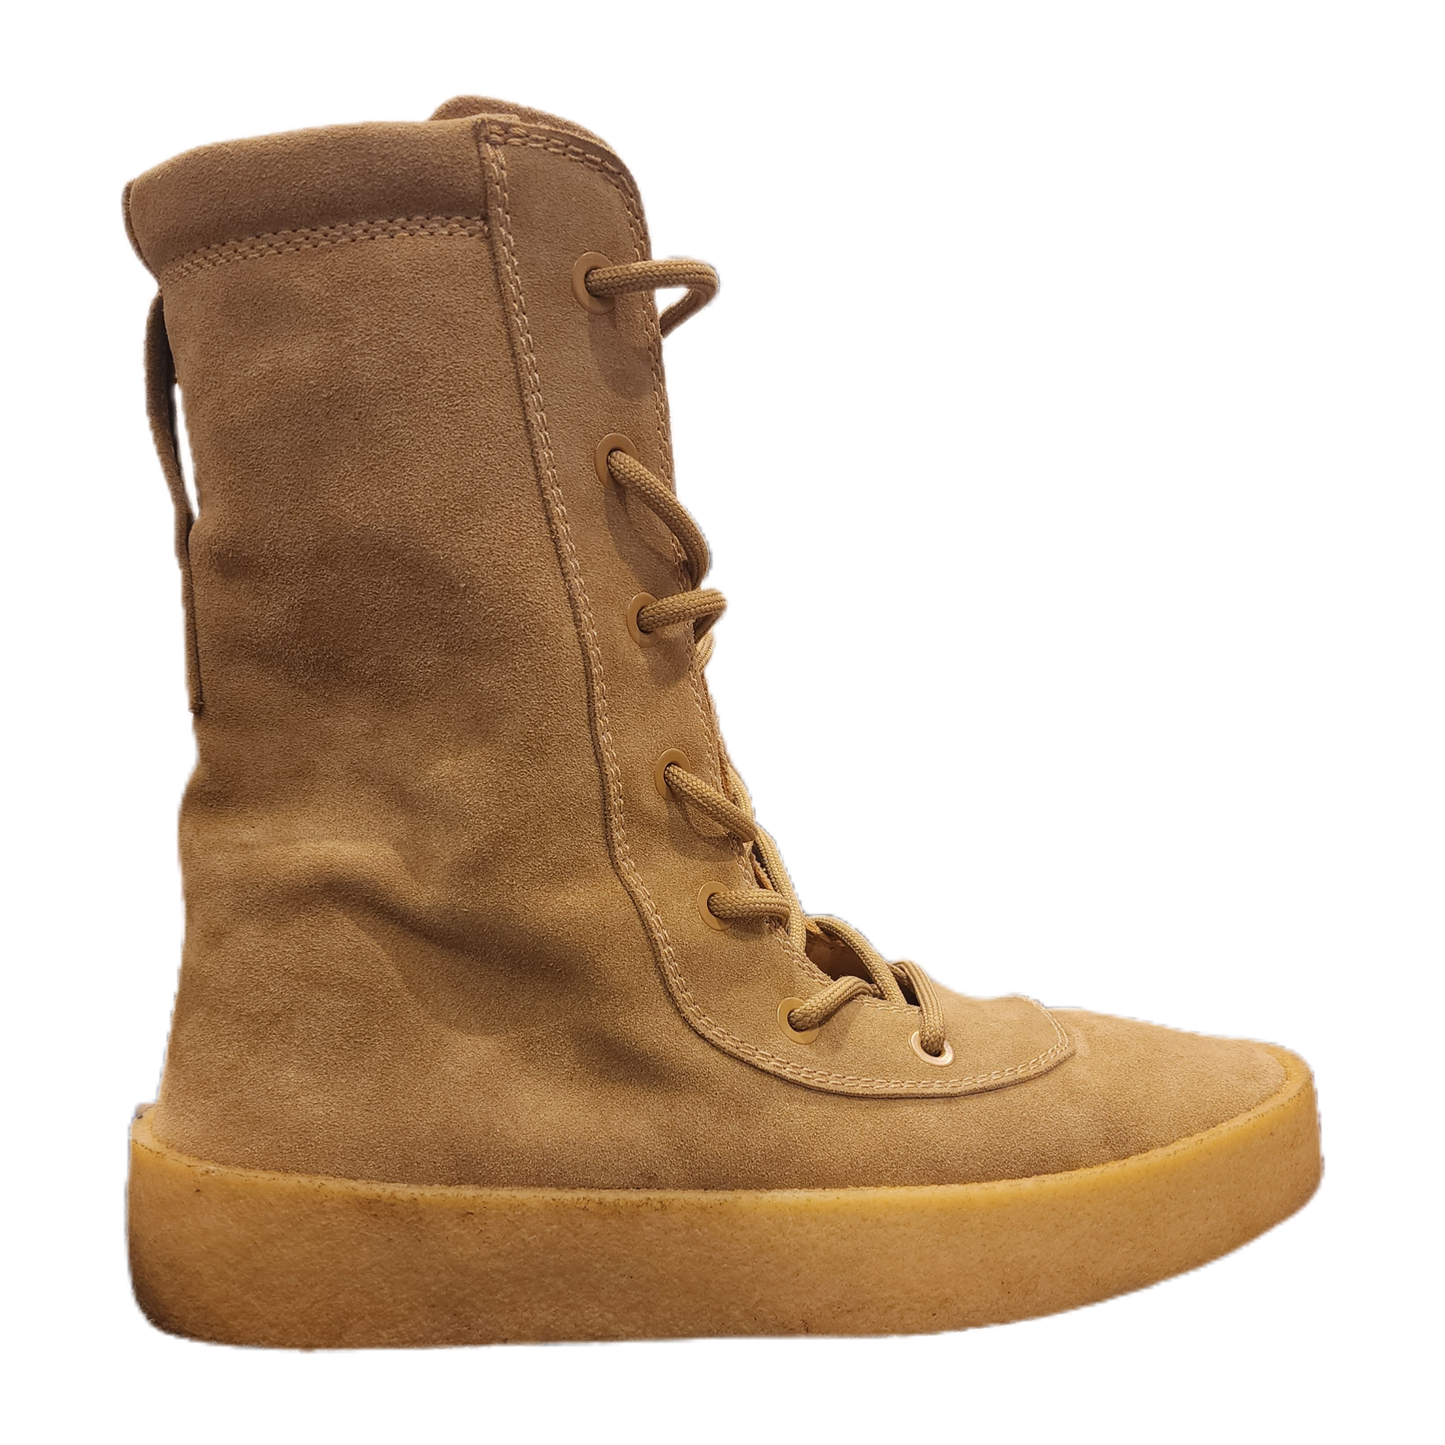 Yeezy - "Szn 4 Taupe Boot" - Size 11